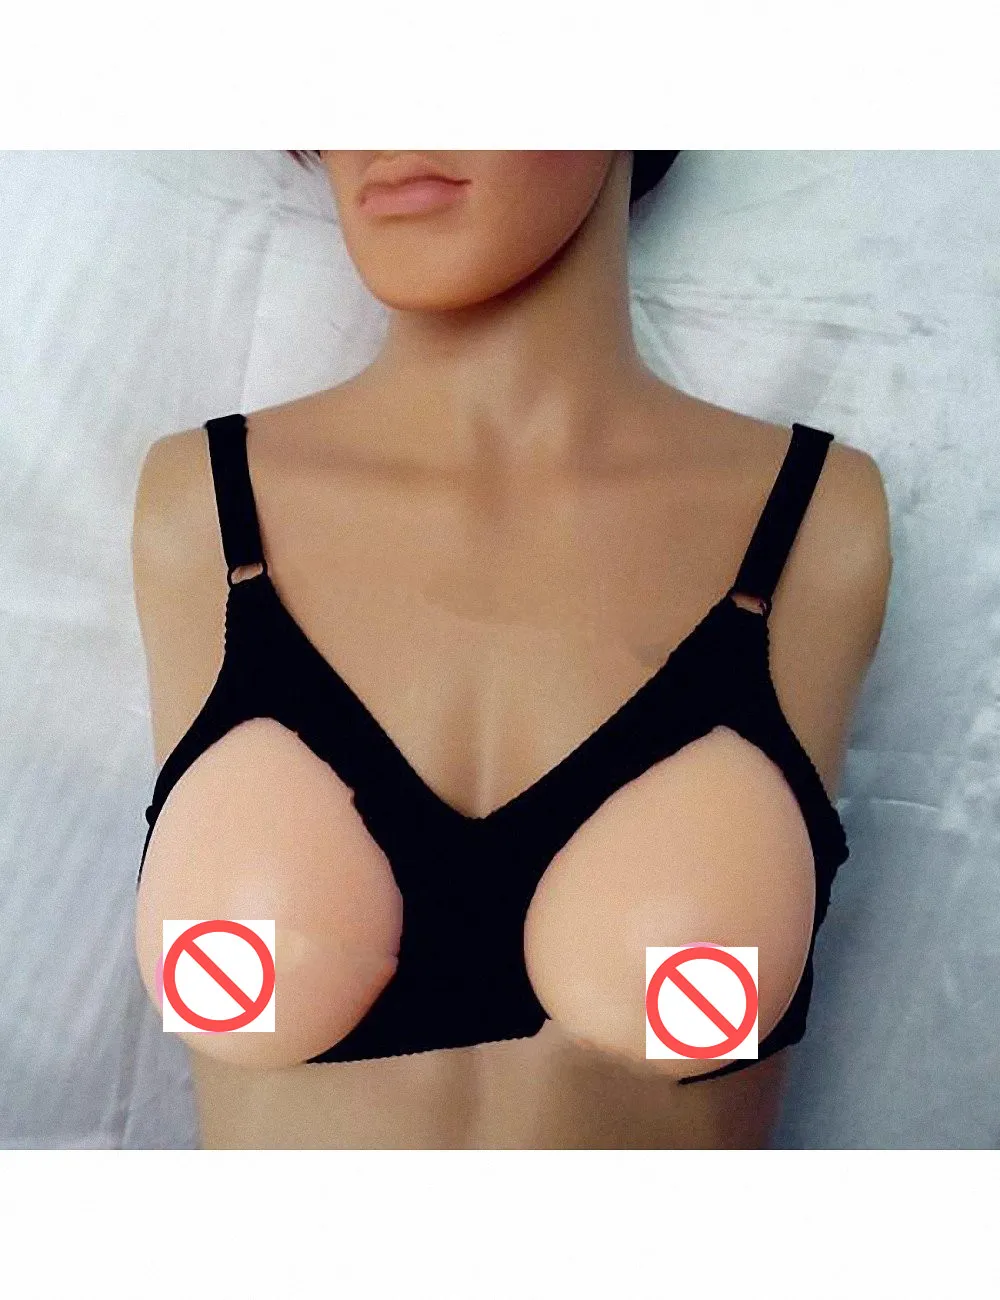 LIZ One Set 1400g E Cup Bra Support Silicone Gel Artificial Breasts Silicone Breast Forms Fake Boobs for Cross Dresser